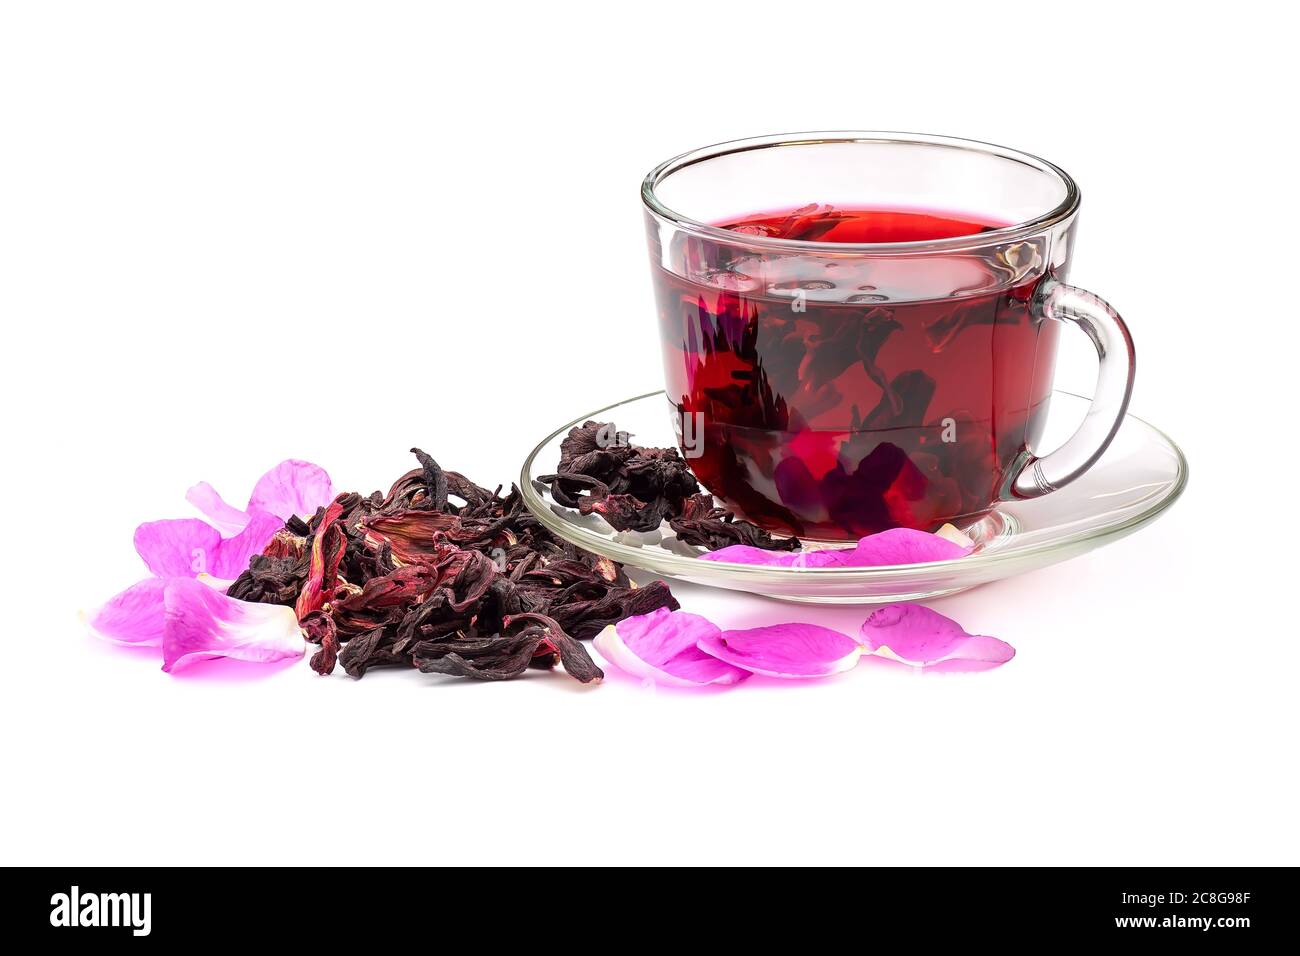 Hibiscus tea in glass cup among the rose petals and dry petals isolated on white background. Stock Photo